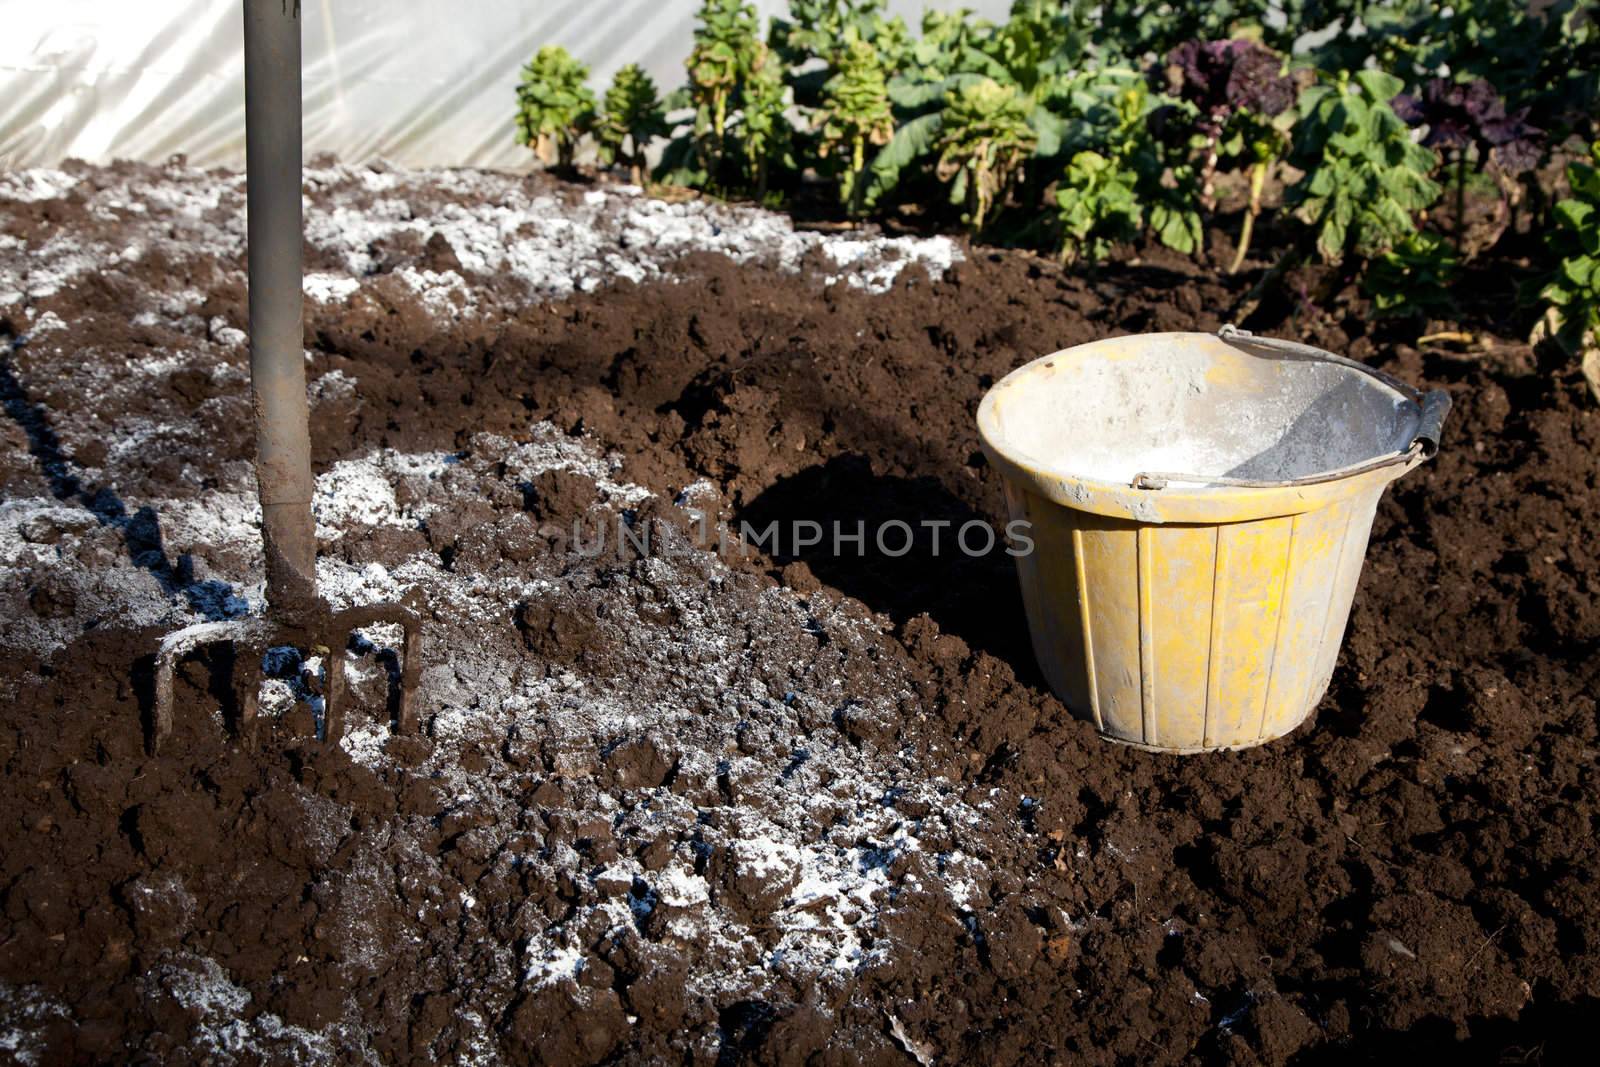 A patch of garden dug over showing a fork and bucket of lime and lime spresd over the soil.